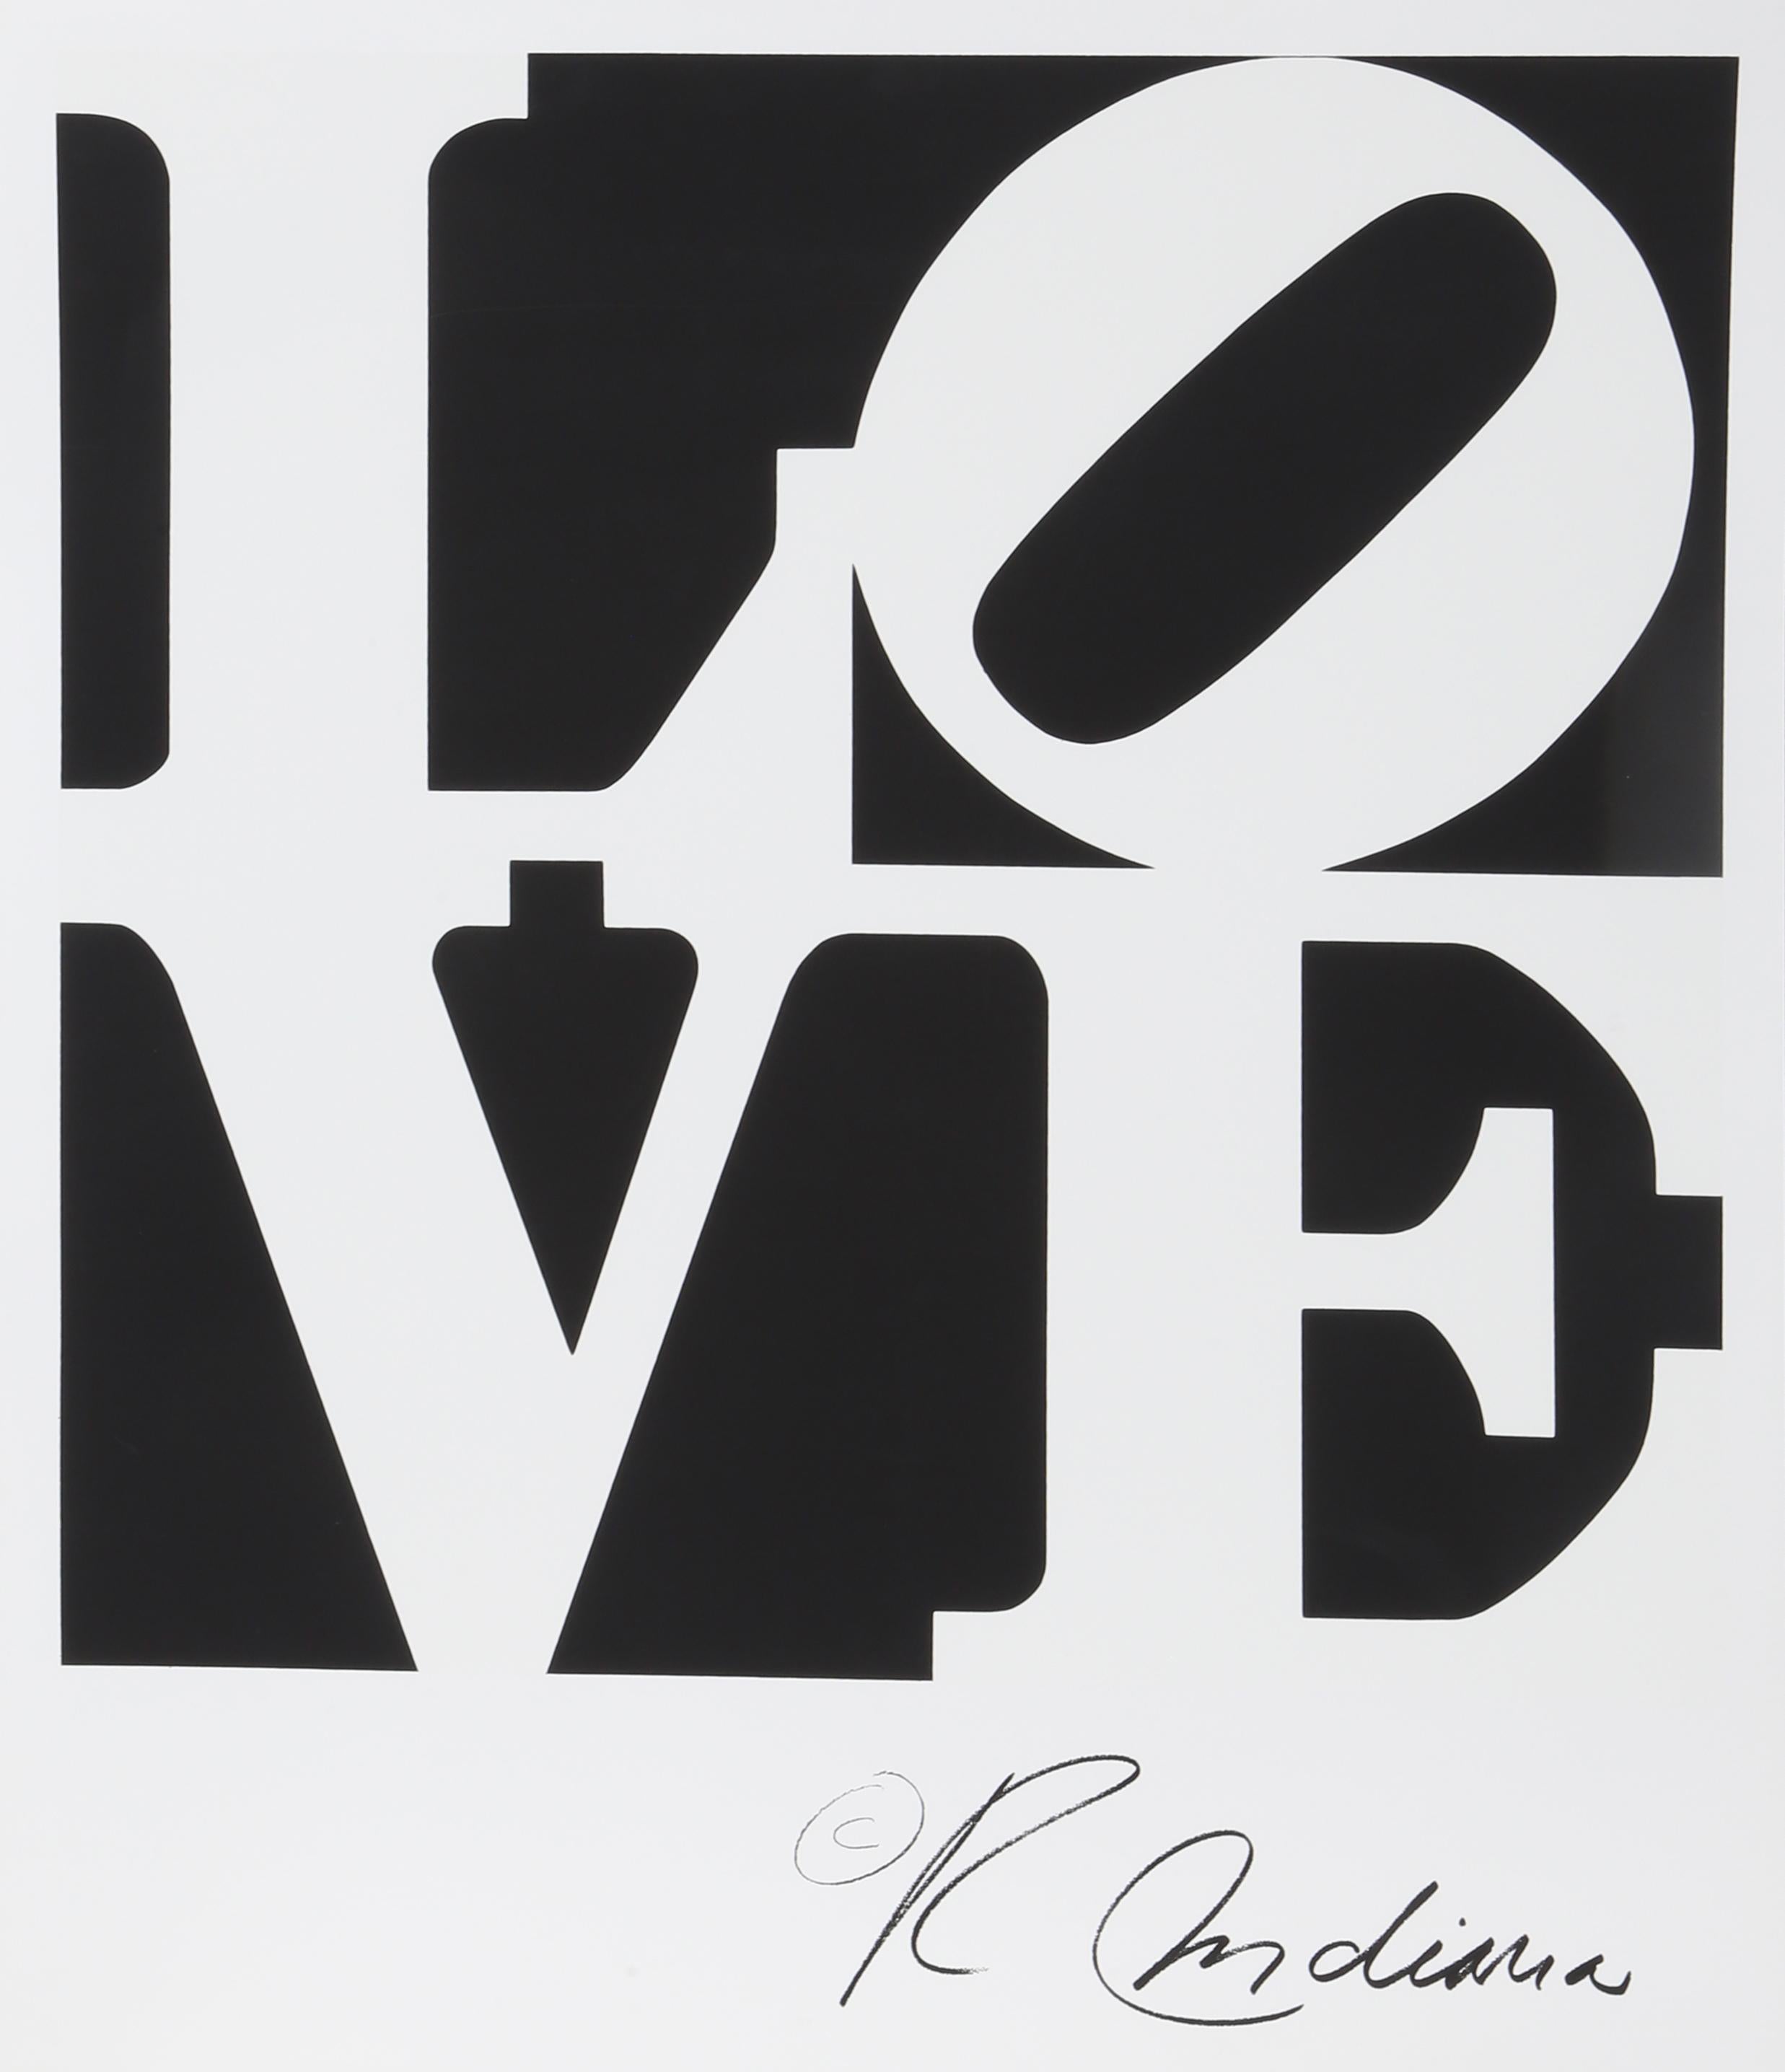 Artist: Robert Indiana, American (1928 - 2018)
Title: Love (Black)
Year: circa 1996
Medium:	Silkscreen, signed in the plate l.r.
Image Size: 26 x 26 inches 
Paper Size: 33 x 28 in. (83.82 x 71.12 cm)

Published by American Image Editions, NY